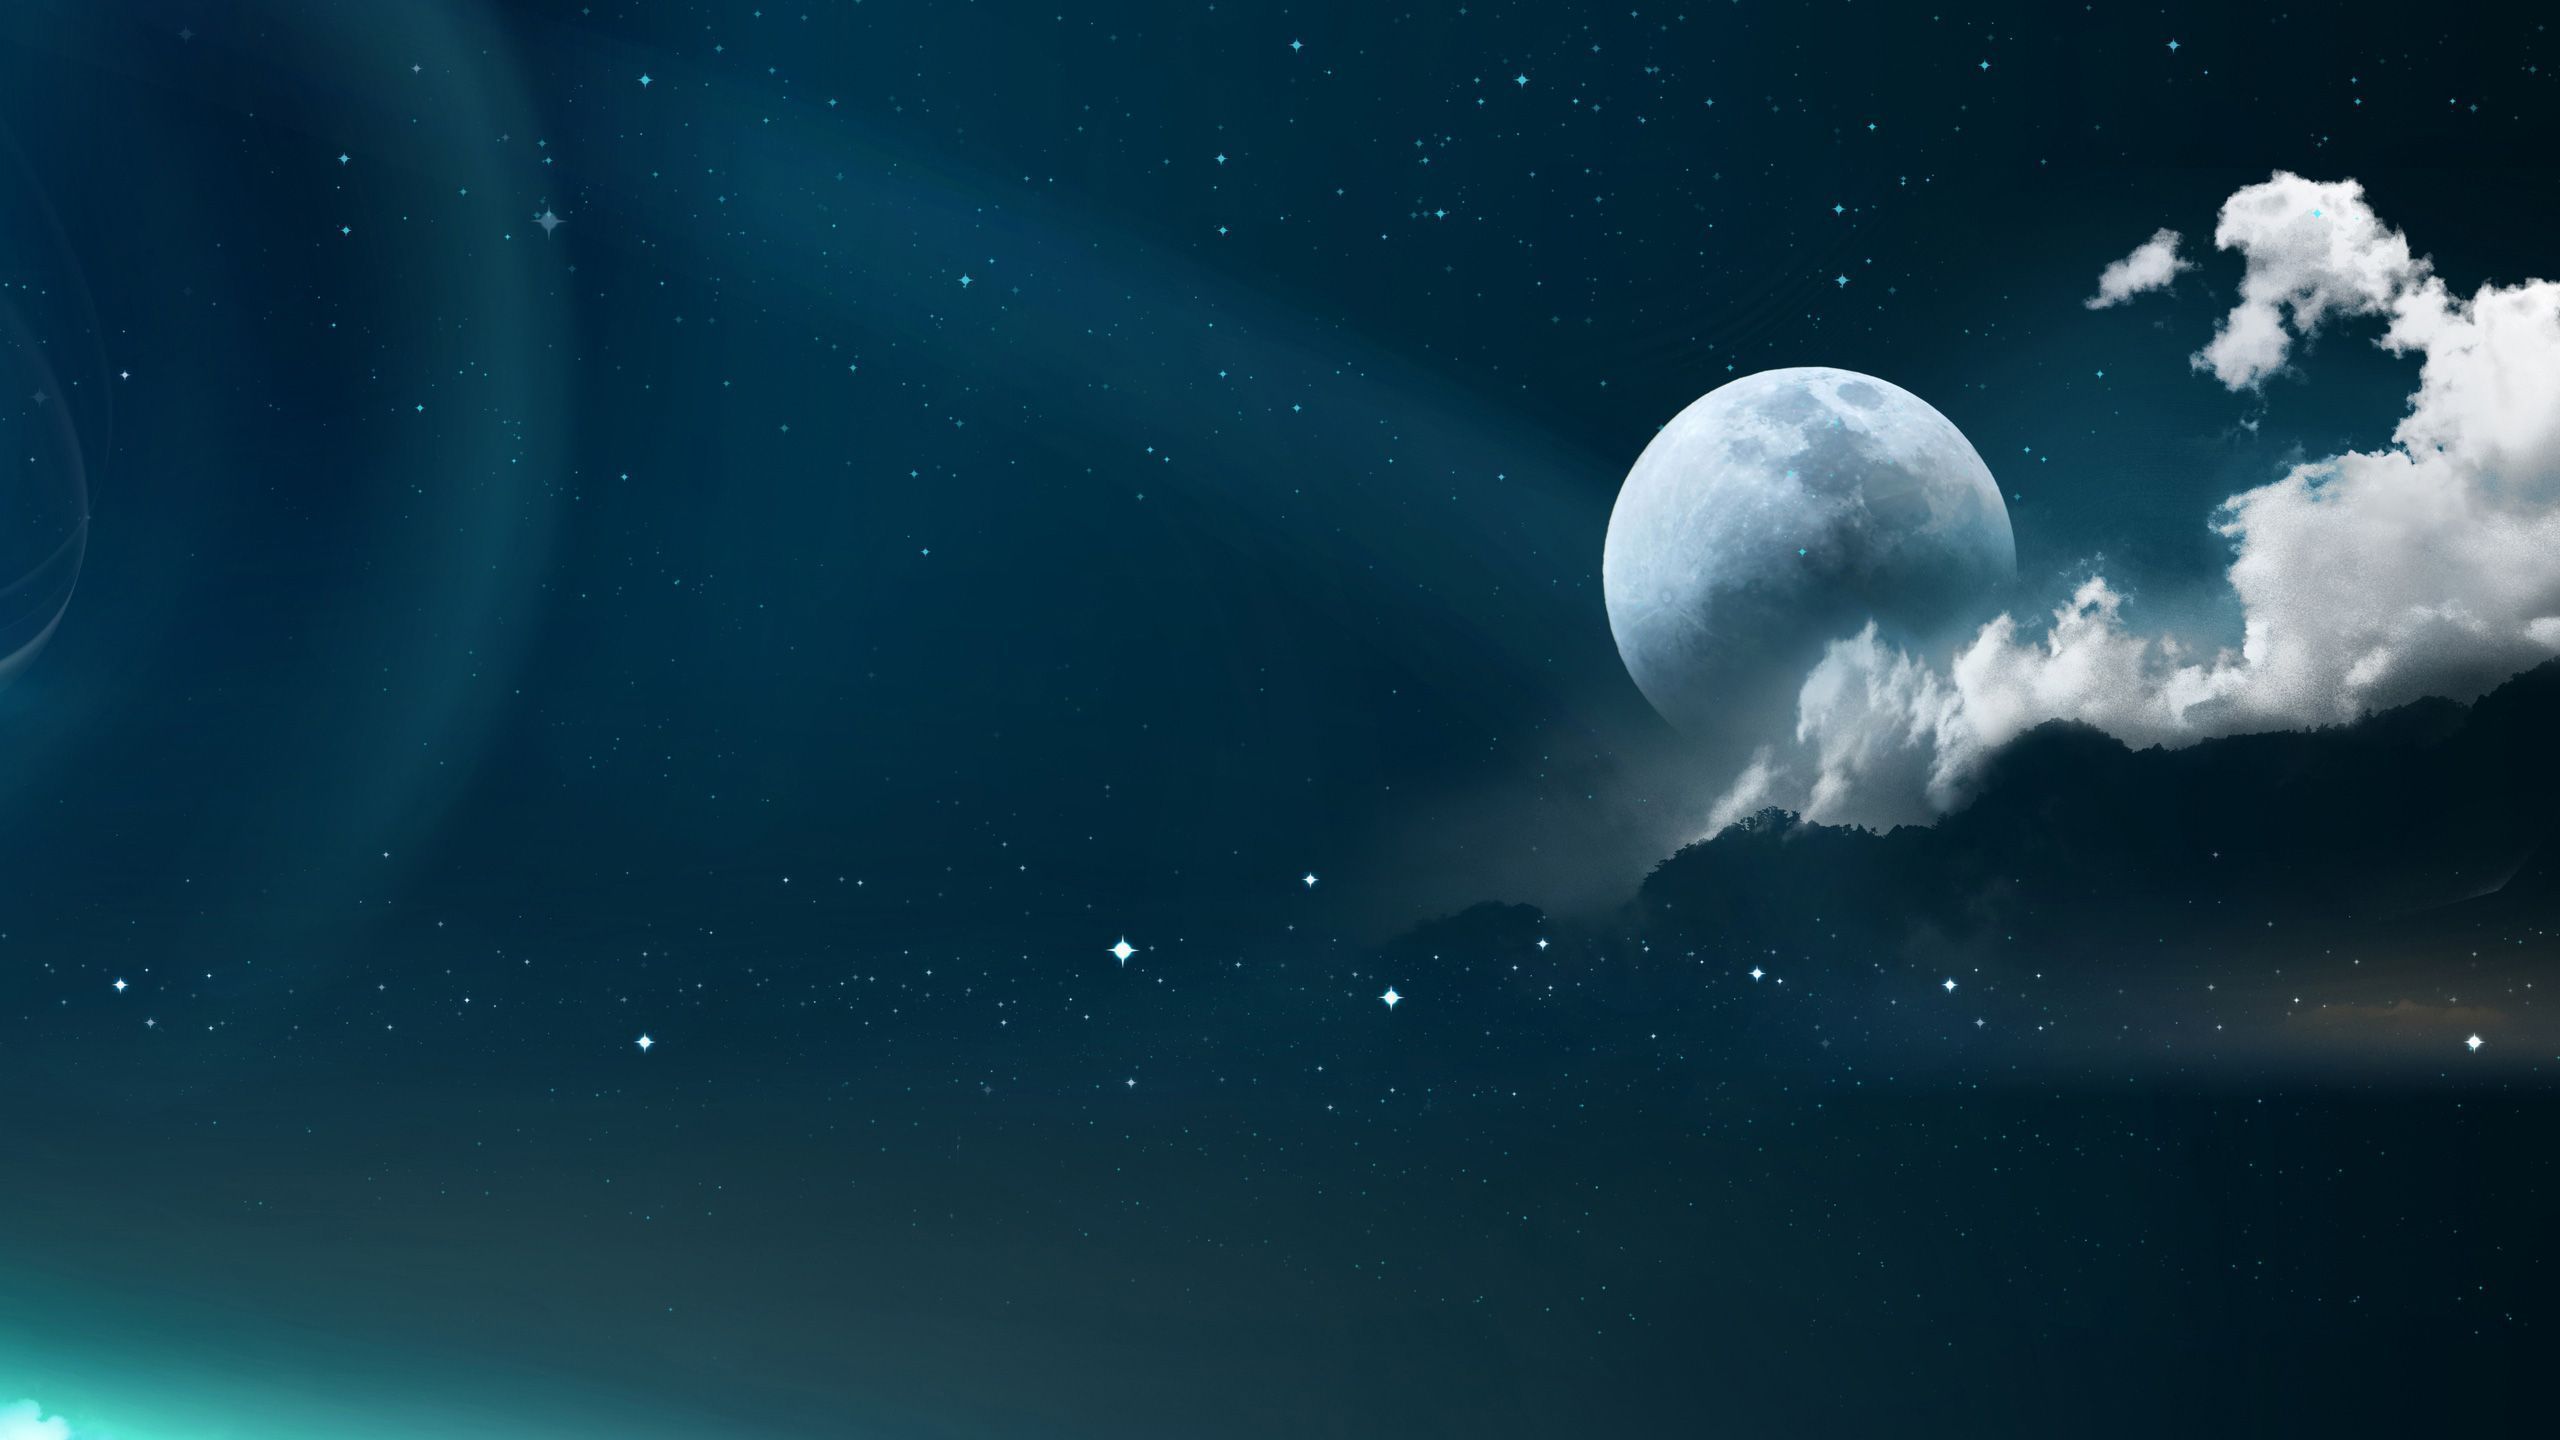 Moon in the clouds wallpaper 1920x1080 - 2560x1440